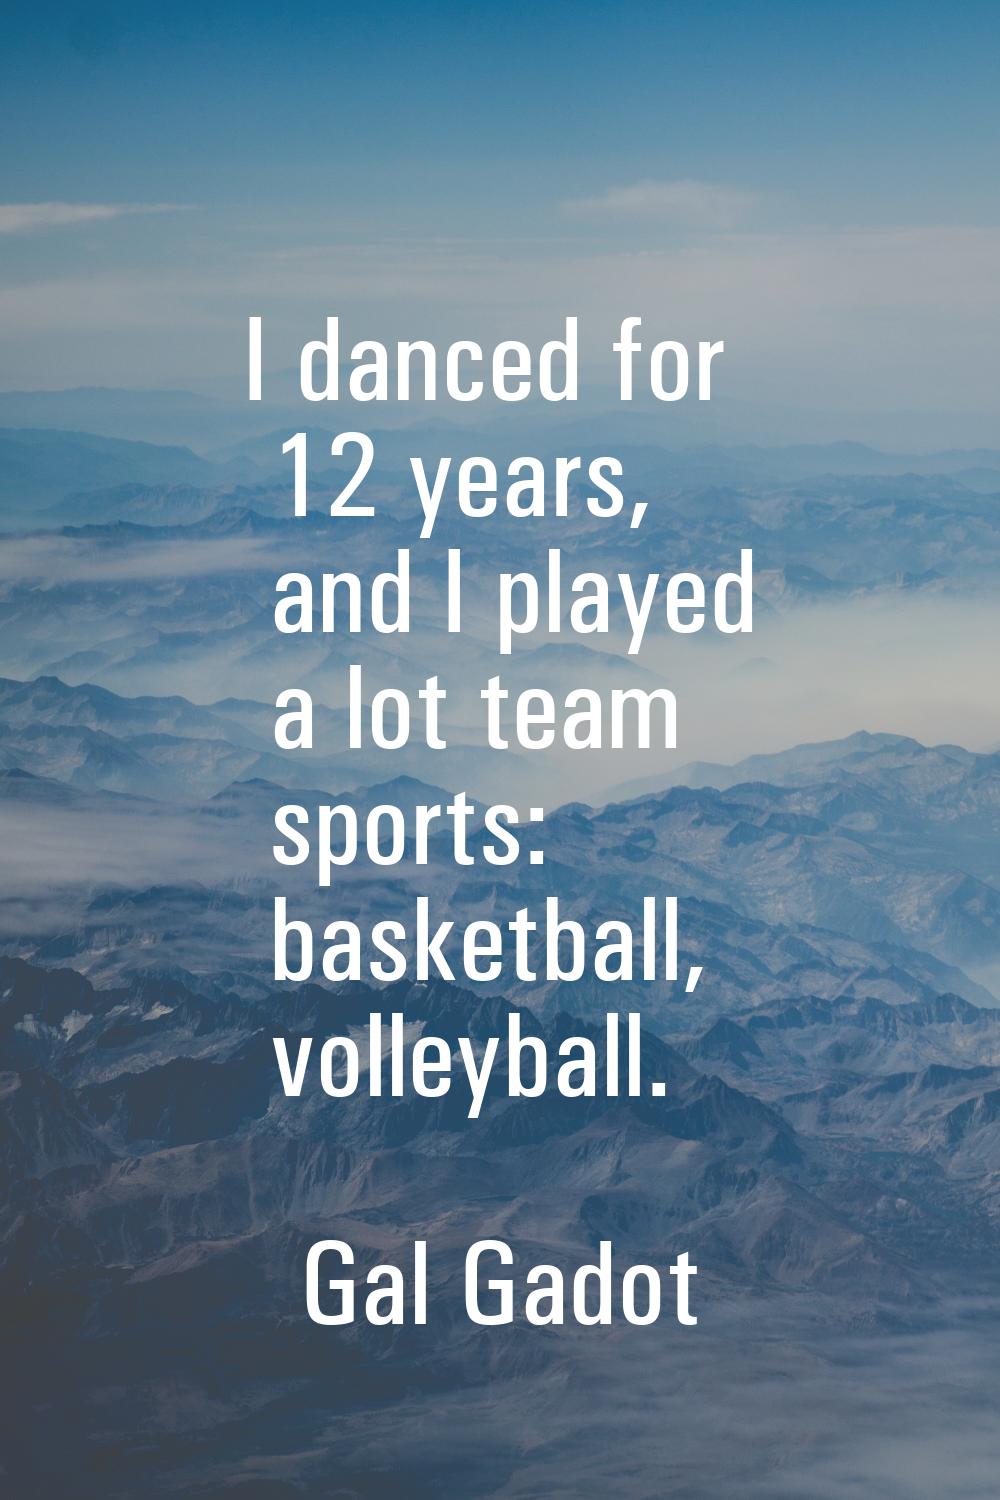 I danced for 12 years, and I played a lot team sports: basketball, volleyball.